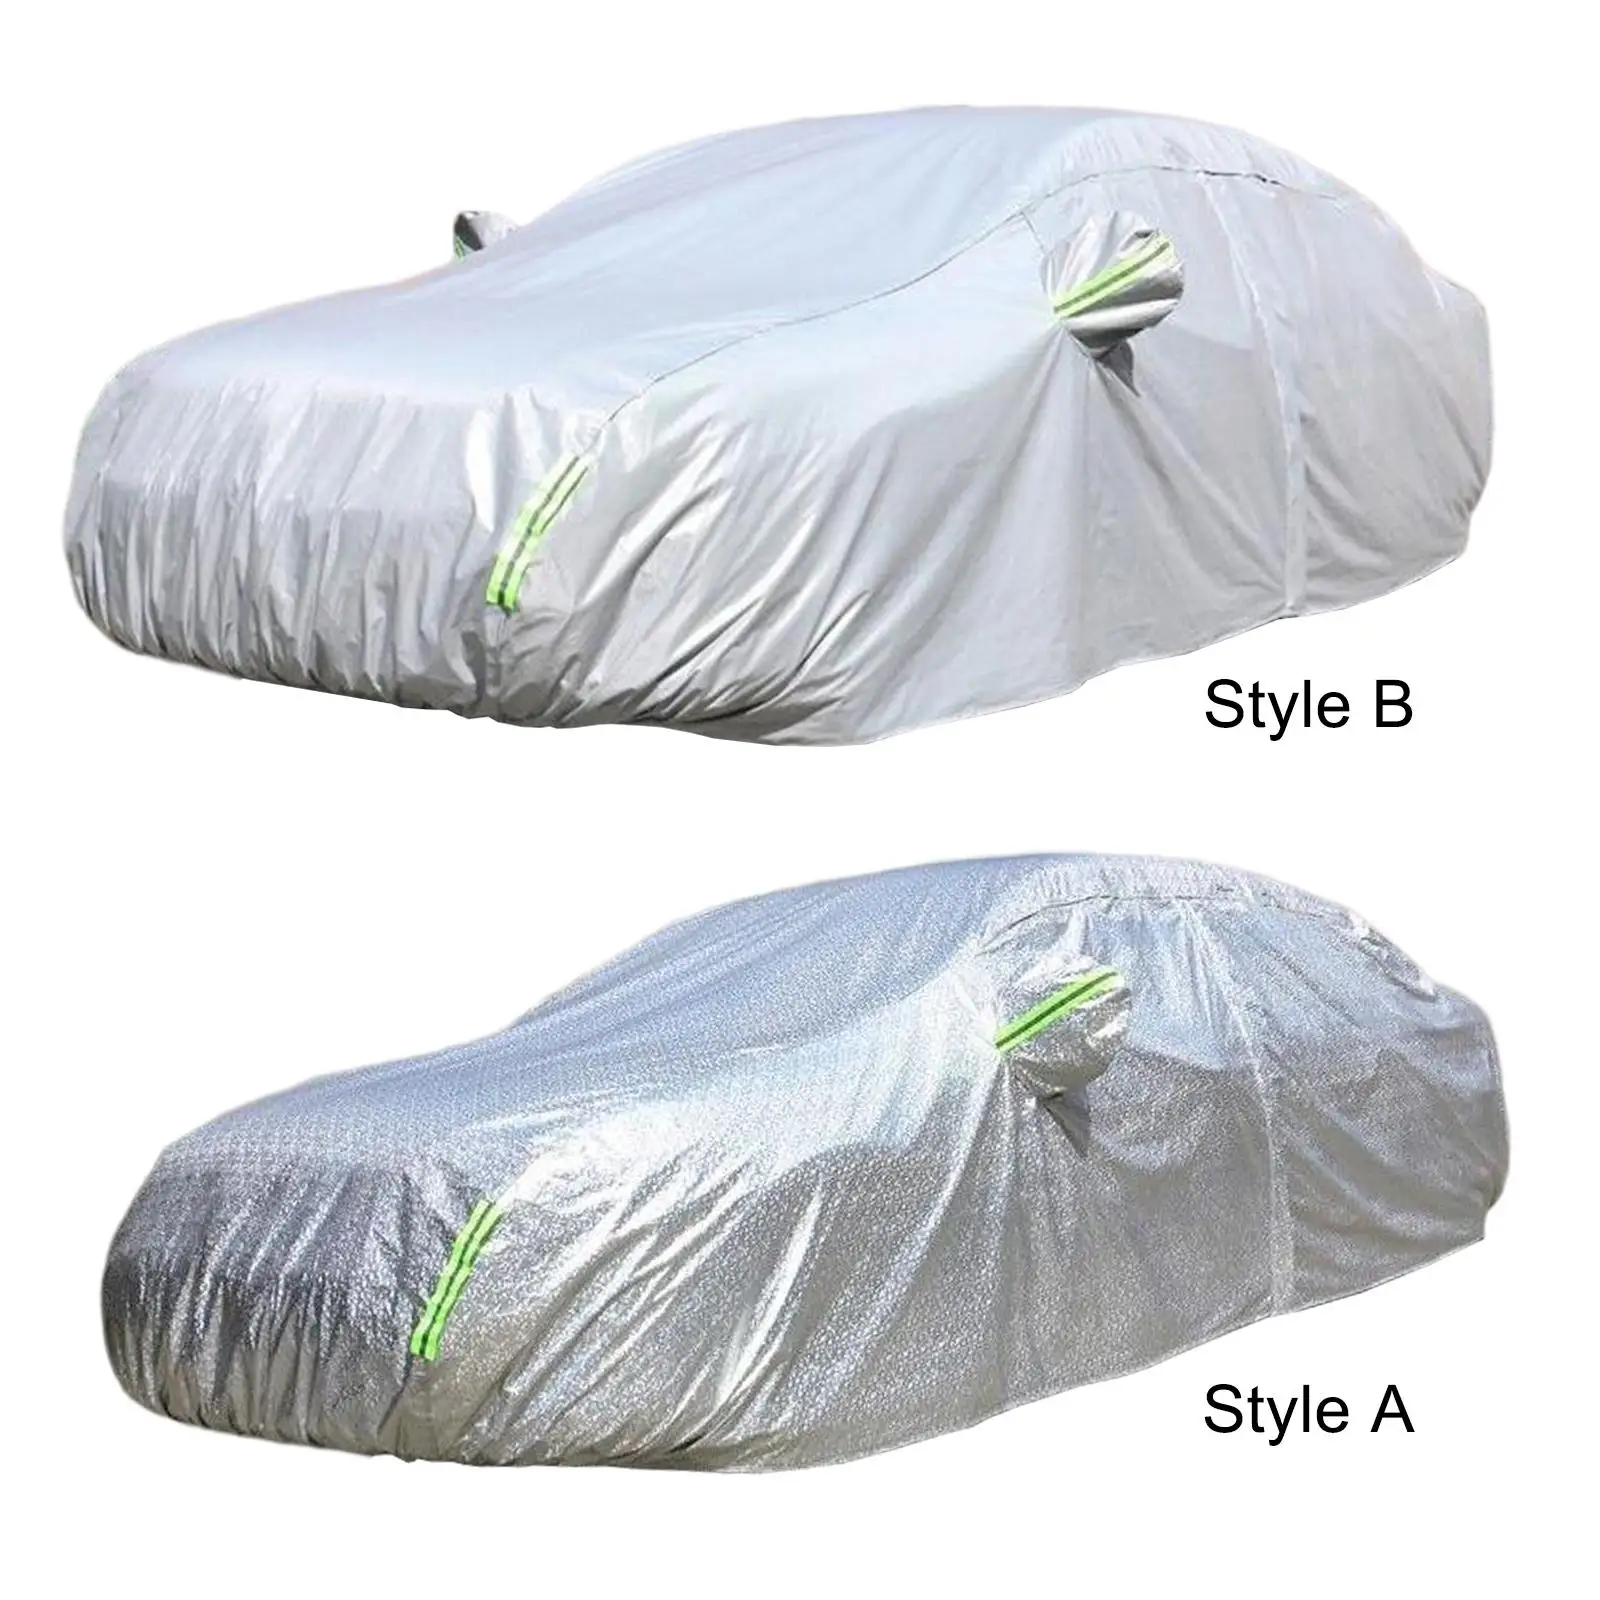 Automotive Outdoor Full Cover for Byd Atto 3 Yuan Plus with Portable Storage Bag Durable Accessory Rainproof